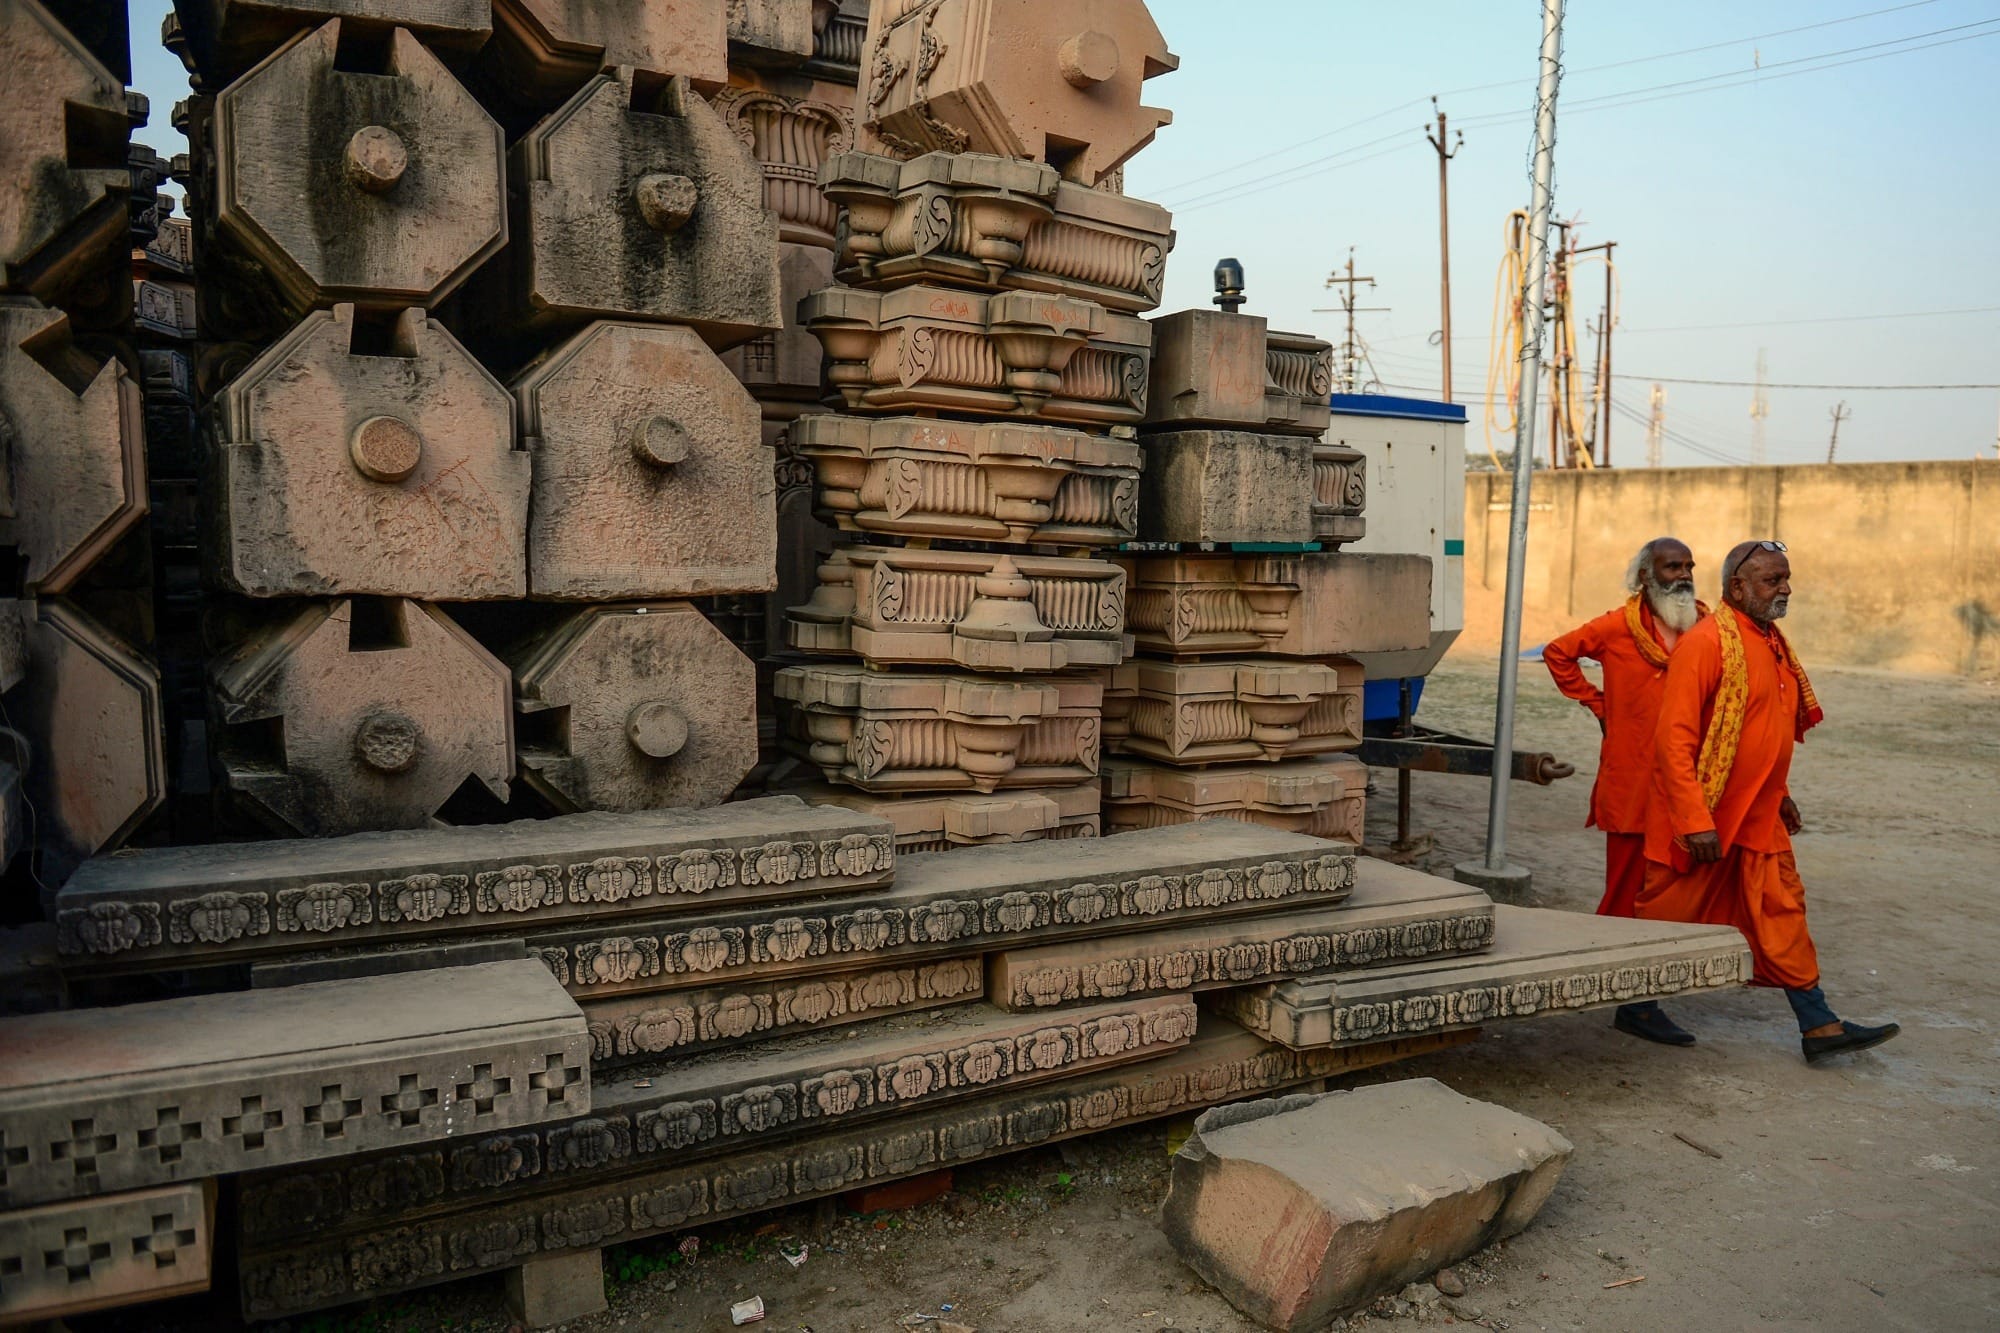 Ayodhya Ram Temple's X factor? The Construction.